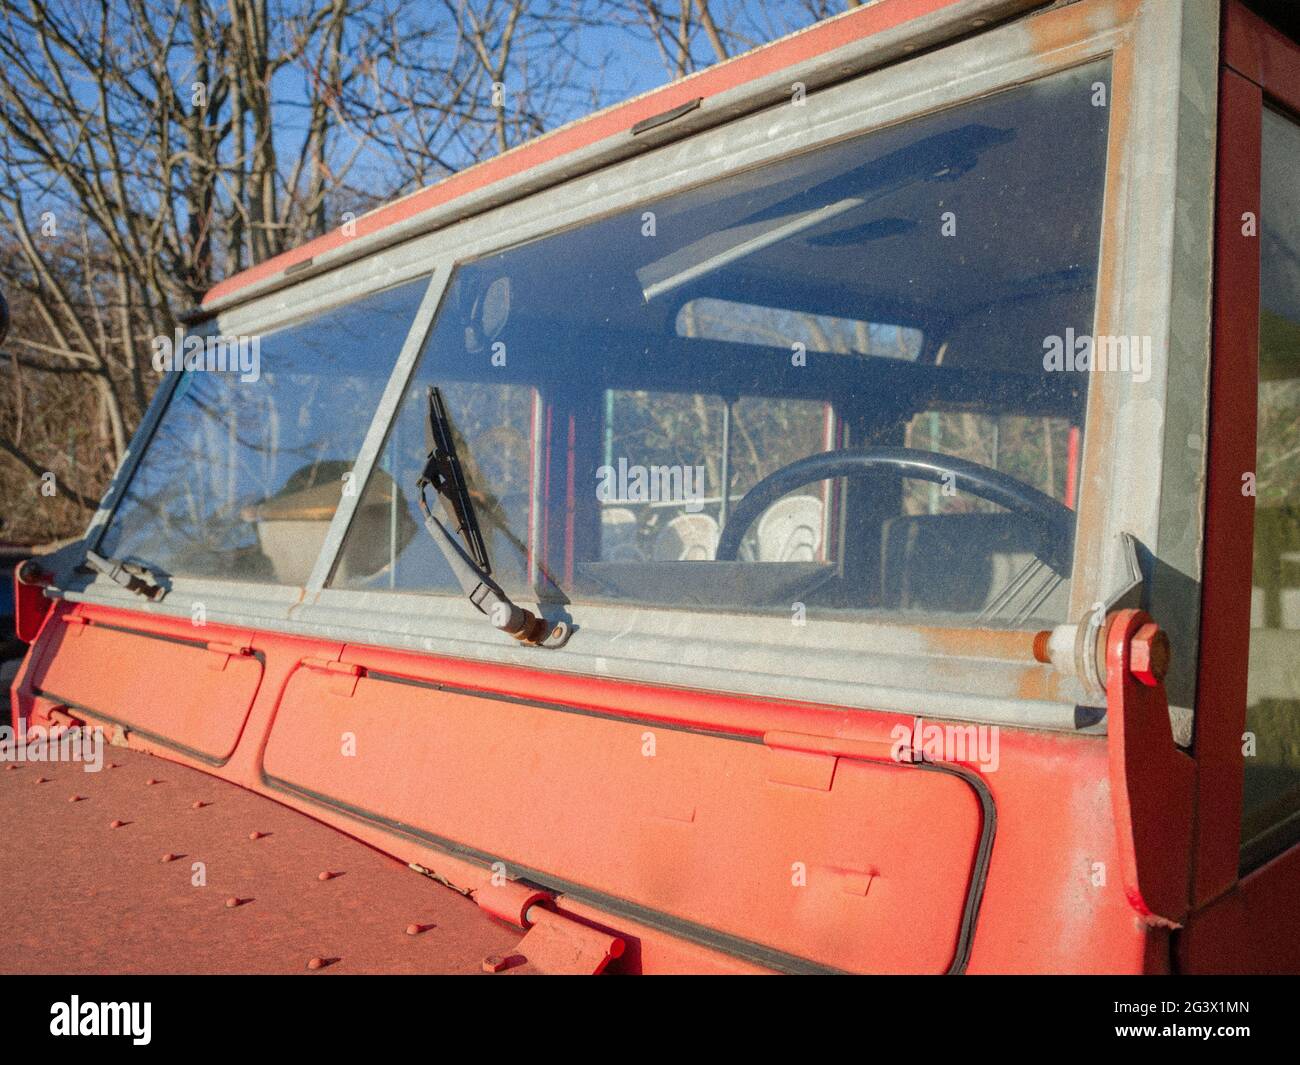 Windscreen and wiper of an old oo-road car in red colour Stock Photo